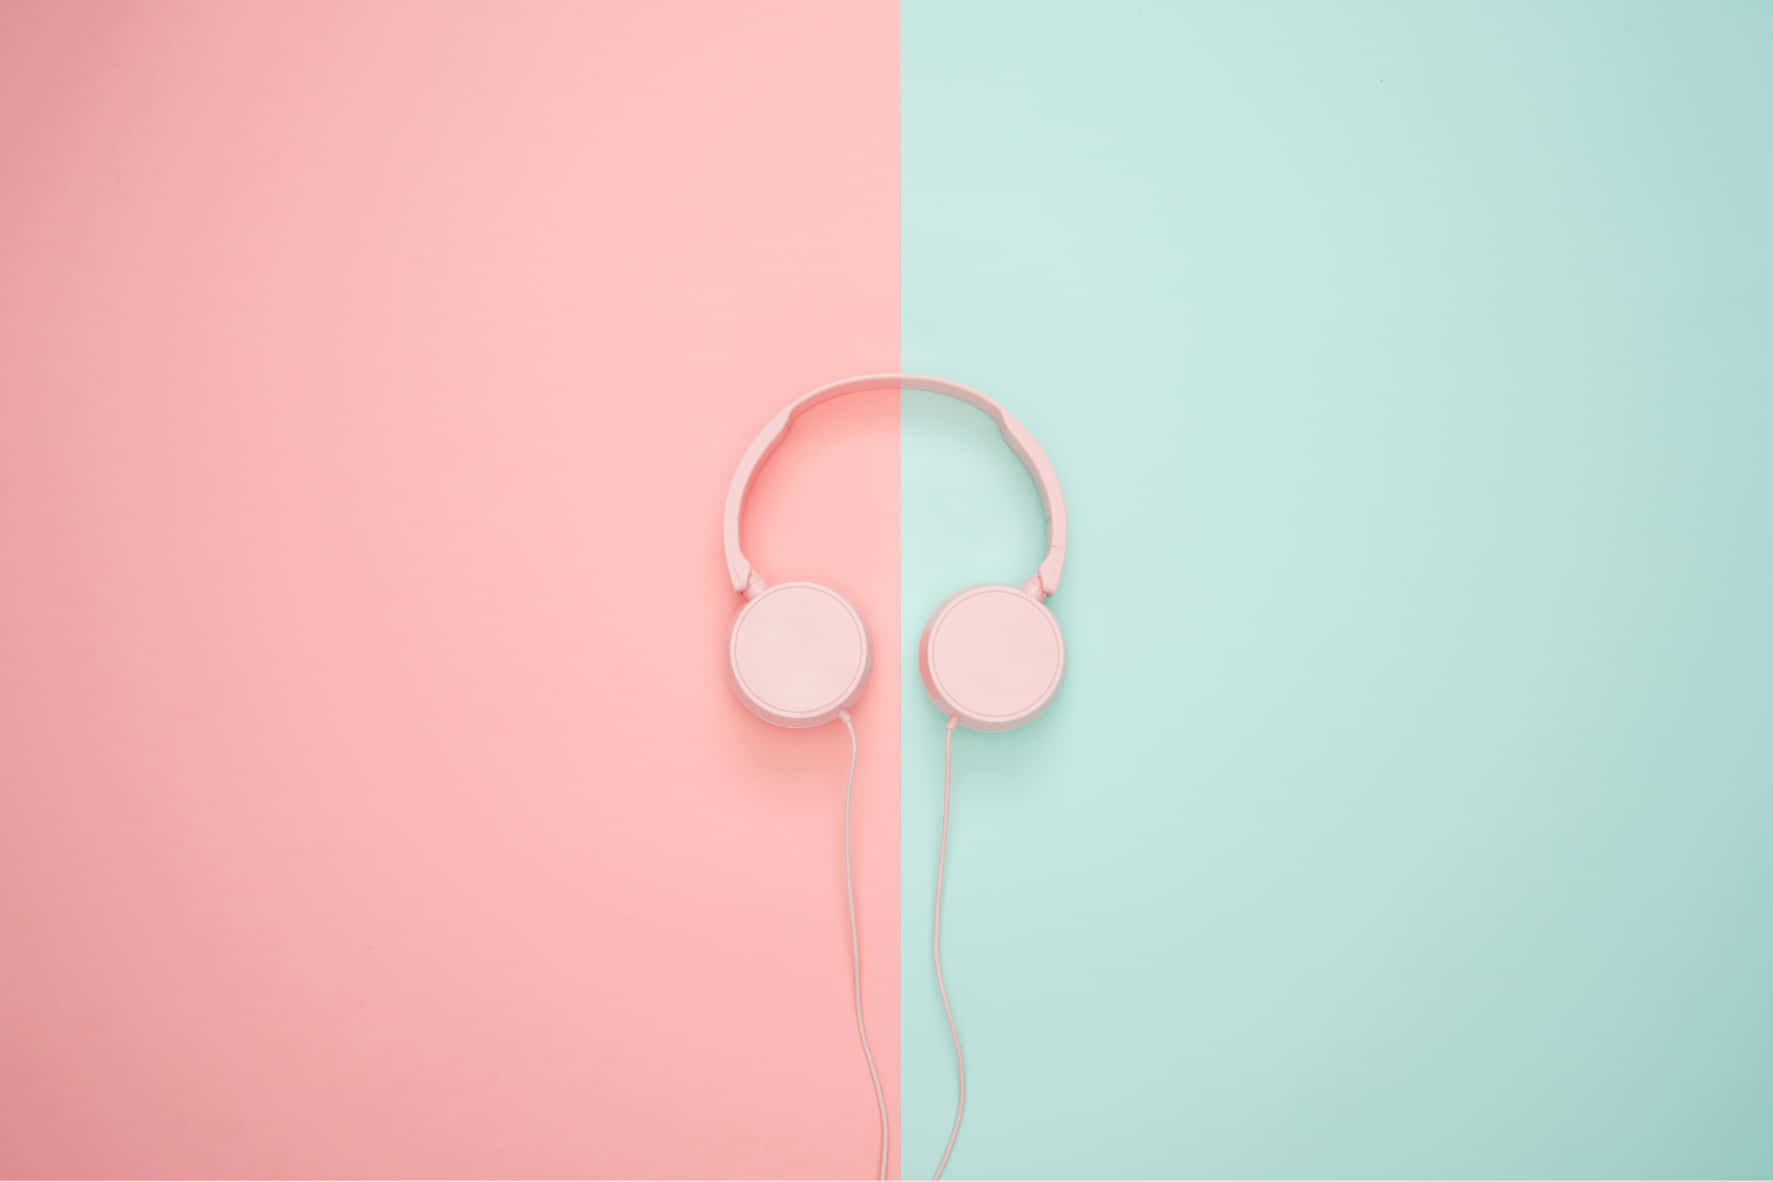 Pink Headphones On A Pink And Blue Background